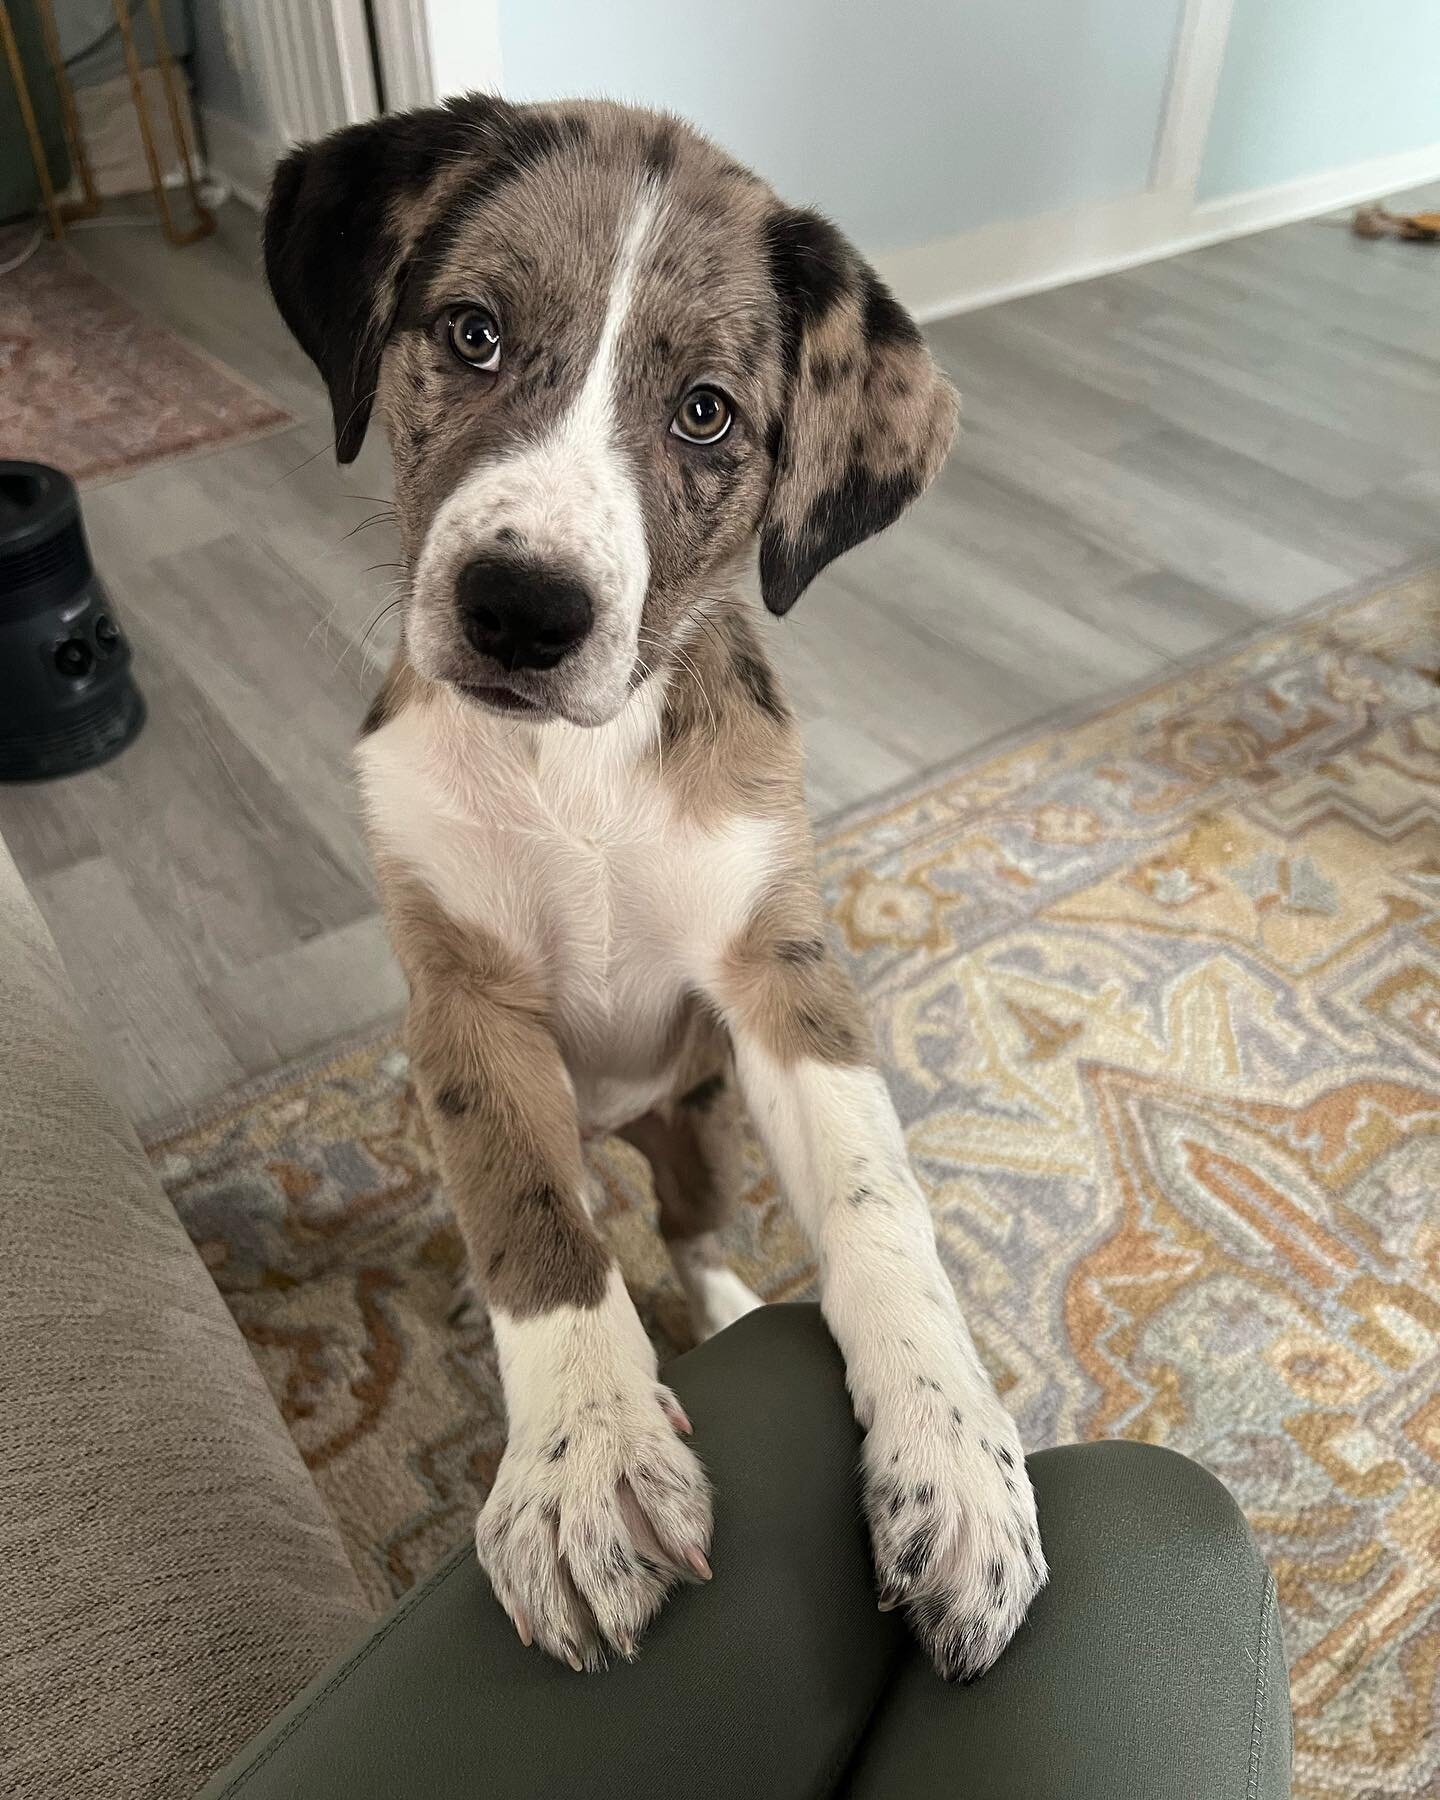 We are elated to introduce the newest member of our wolf pack&hellip;Georgia❣️ Our little Catahoula Leopard / Lab mix

We adopted her this weekend through @saveonesoularl 

She&rsquo;s already leaving paw prints all over our drawings &amp; hearts!